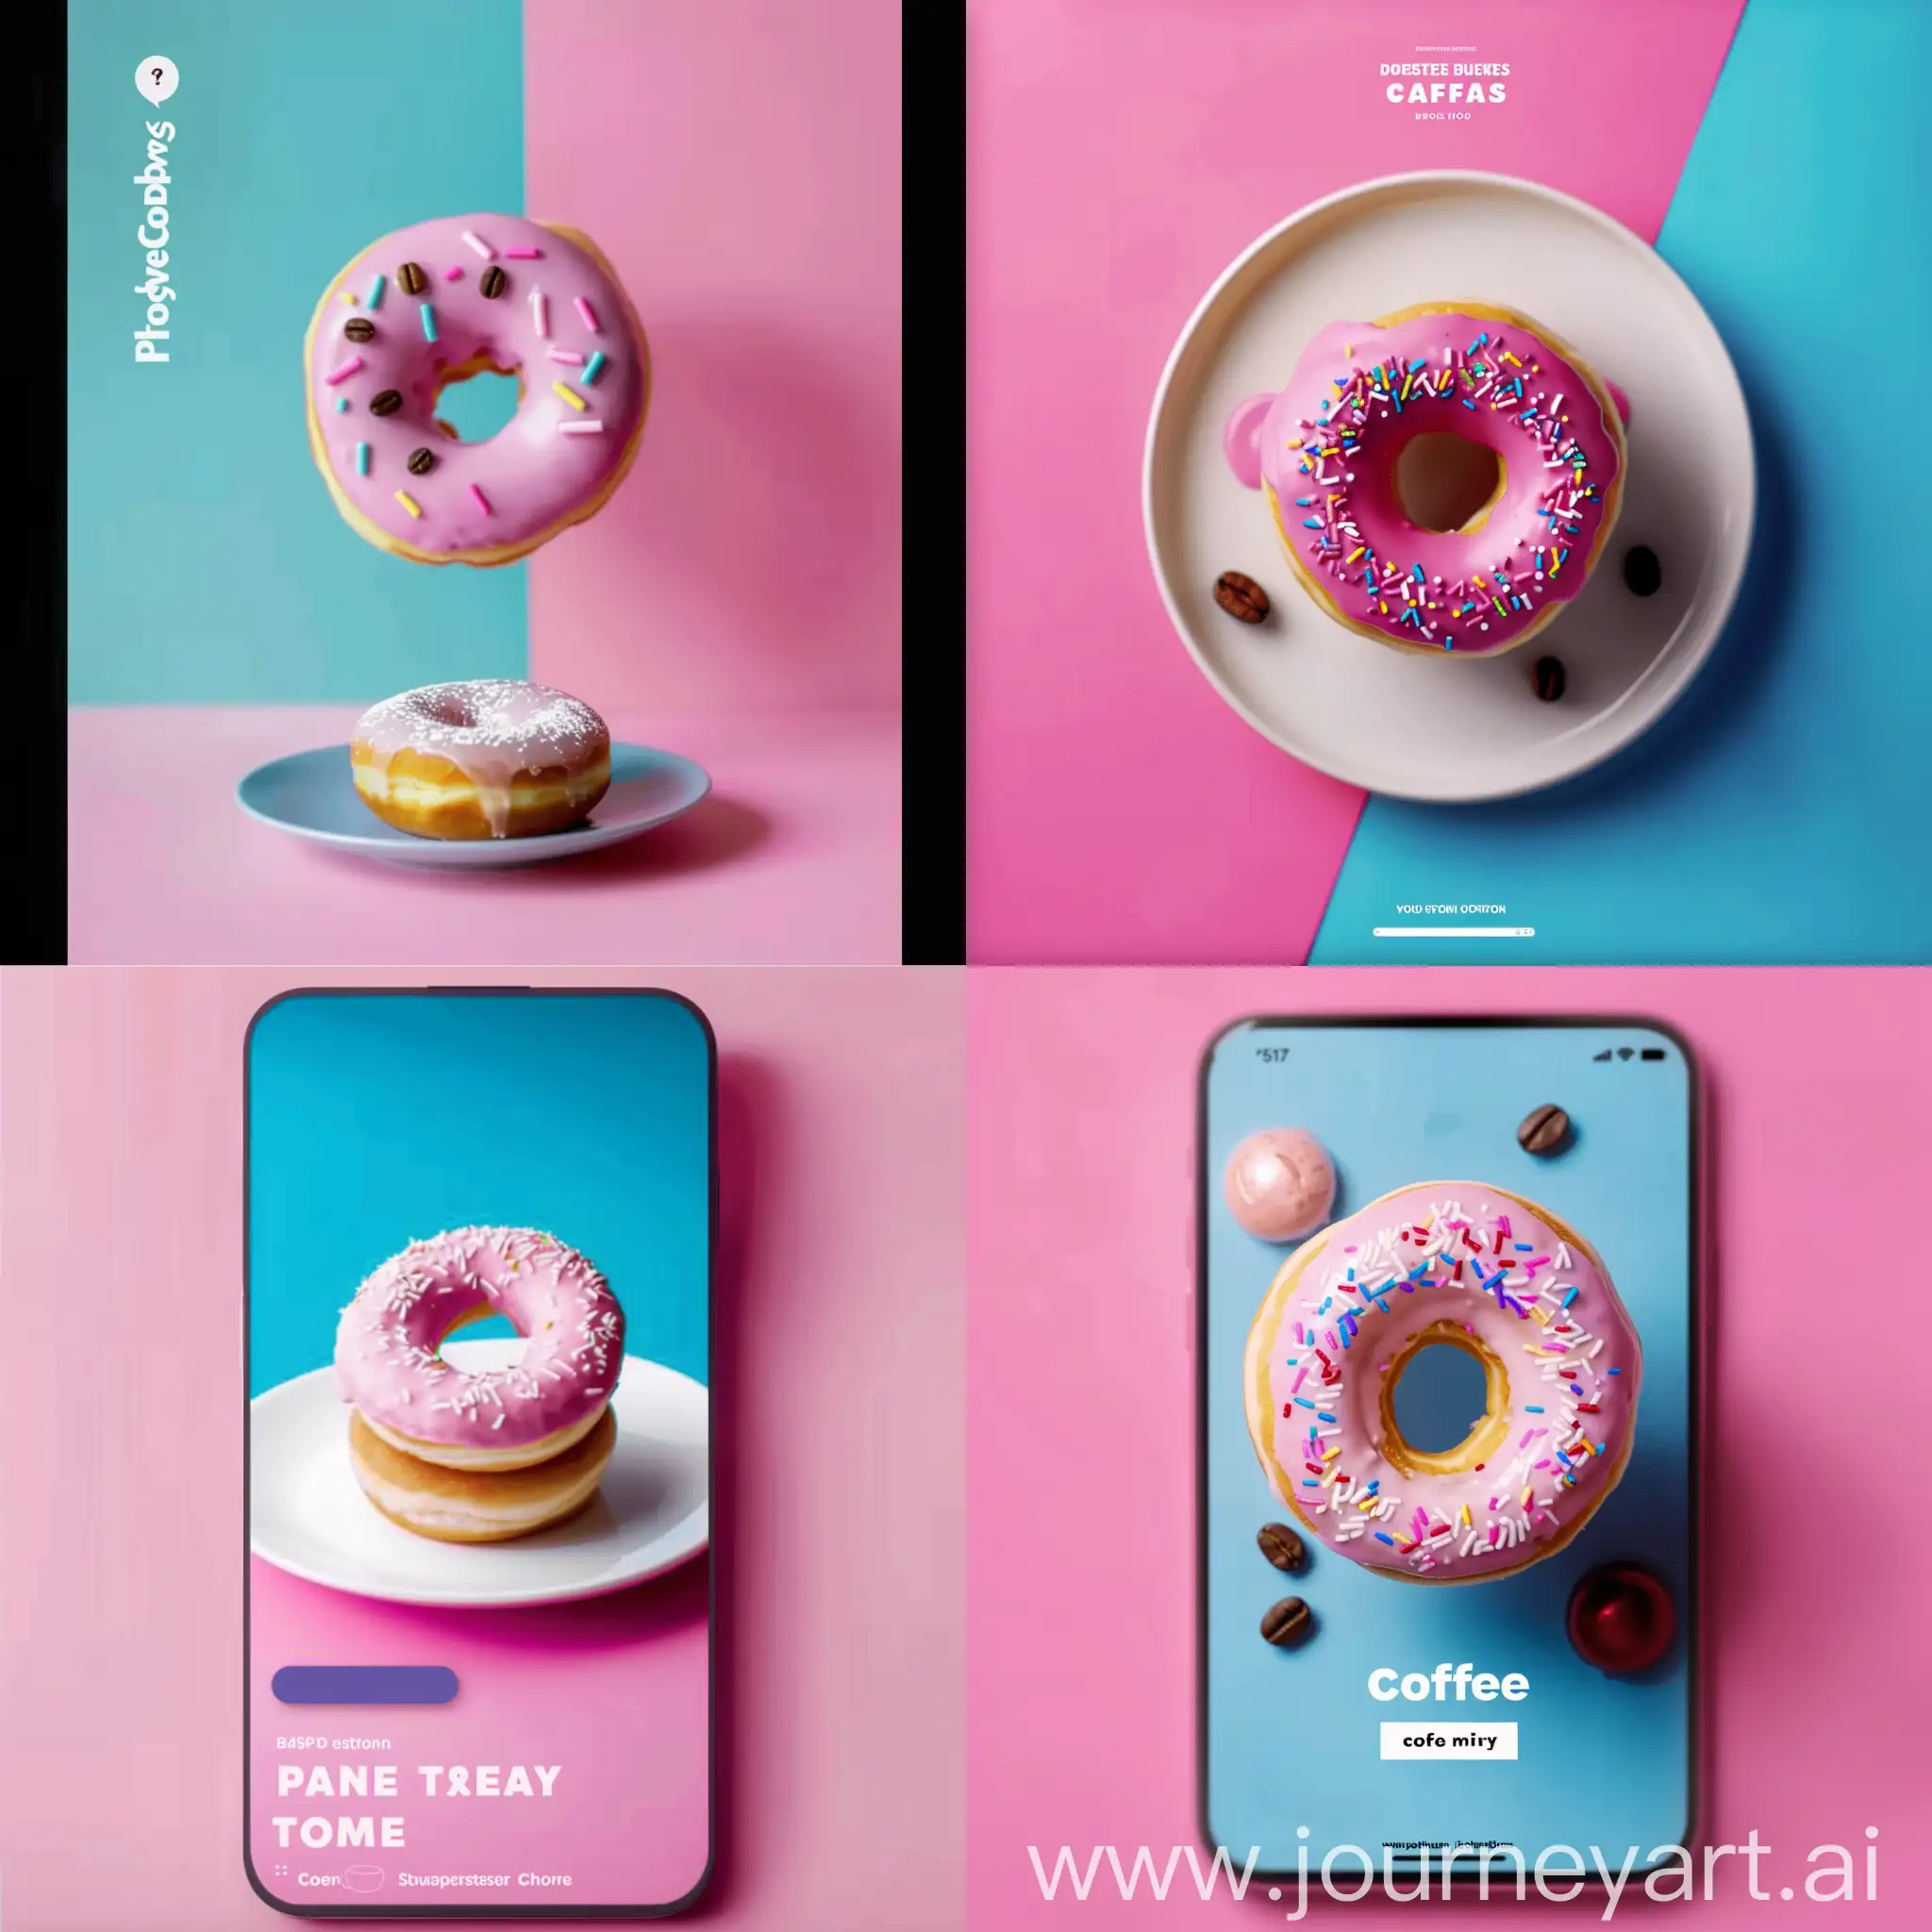 make a similar image without text, for a coffee shop application, with coffee and donuts and other pastries, let it be minimalistic and using pink and blue colors, the background in the same color, pink or blue, studio light